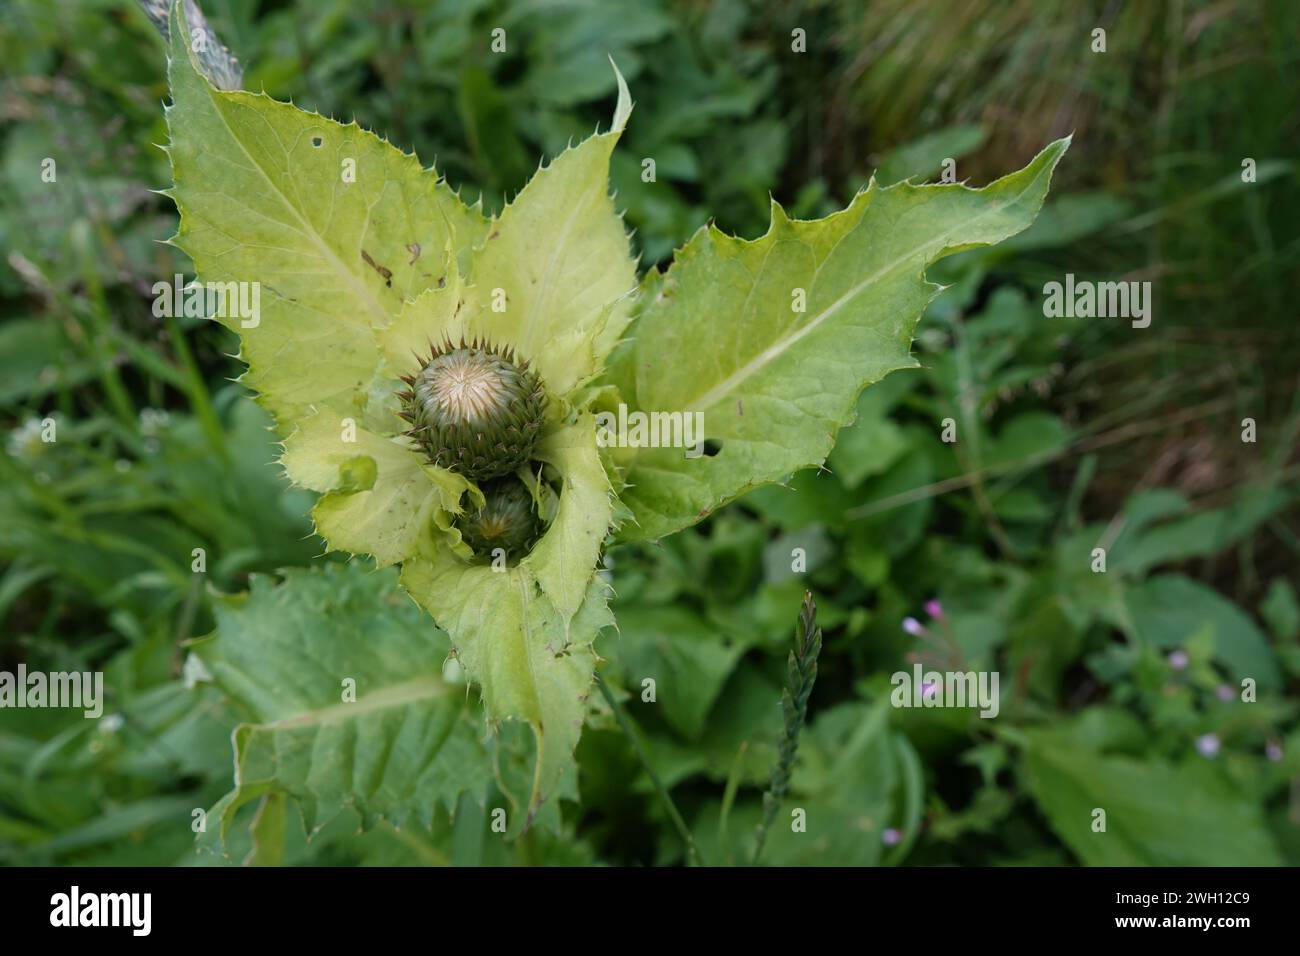 Natural closeup on an emerging flowerhead of a cabbage or Siberian thistle, Cirsium oleraceum Stock Photo